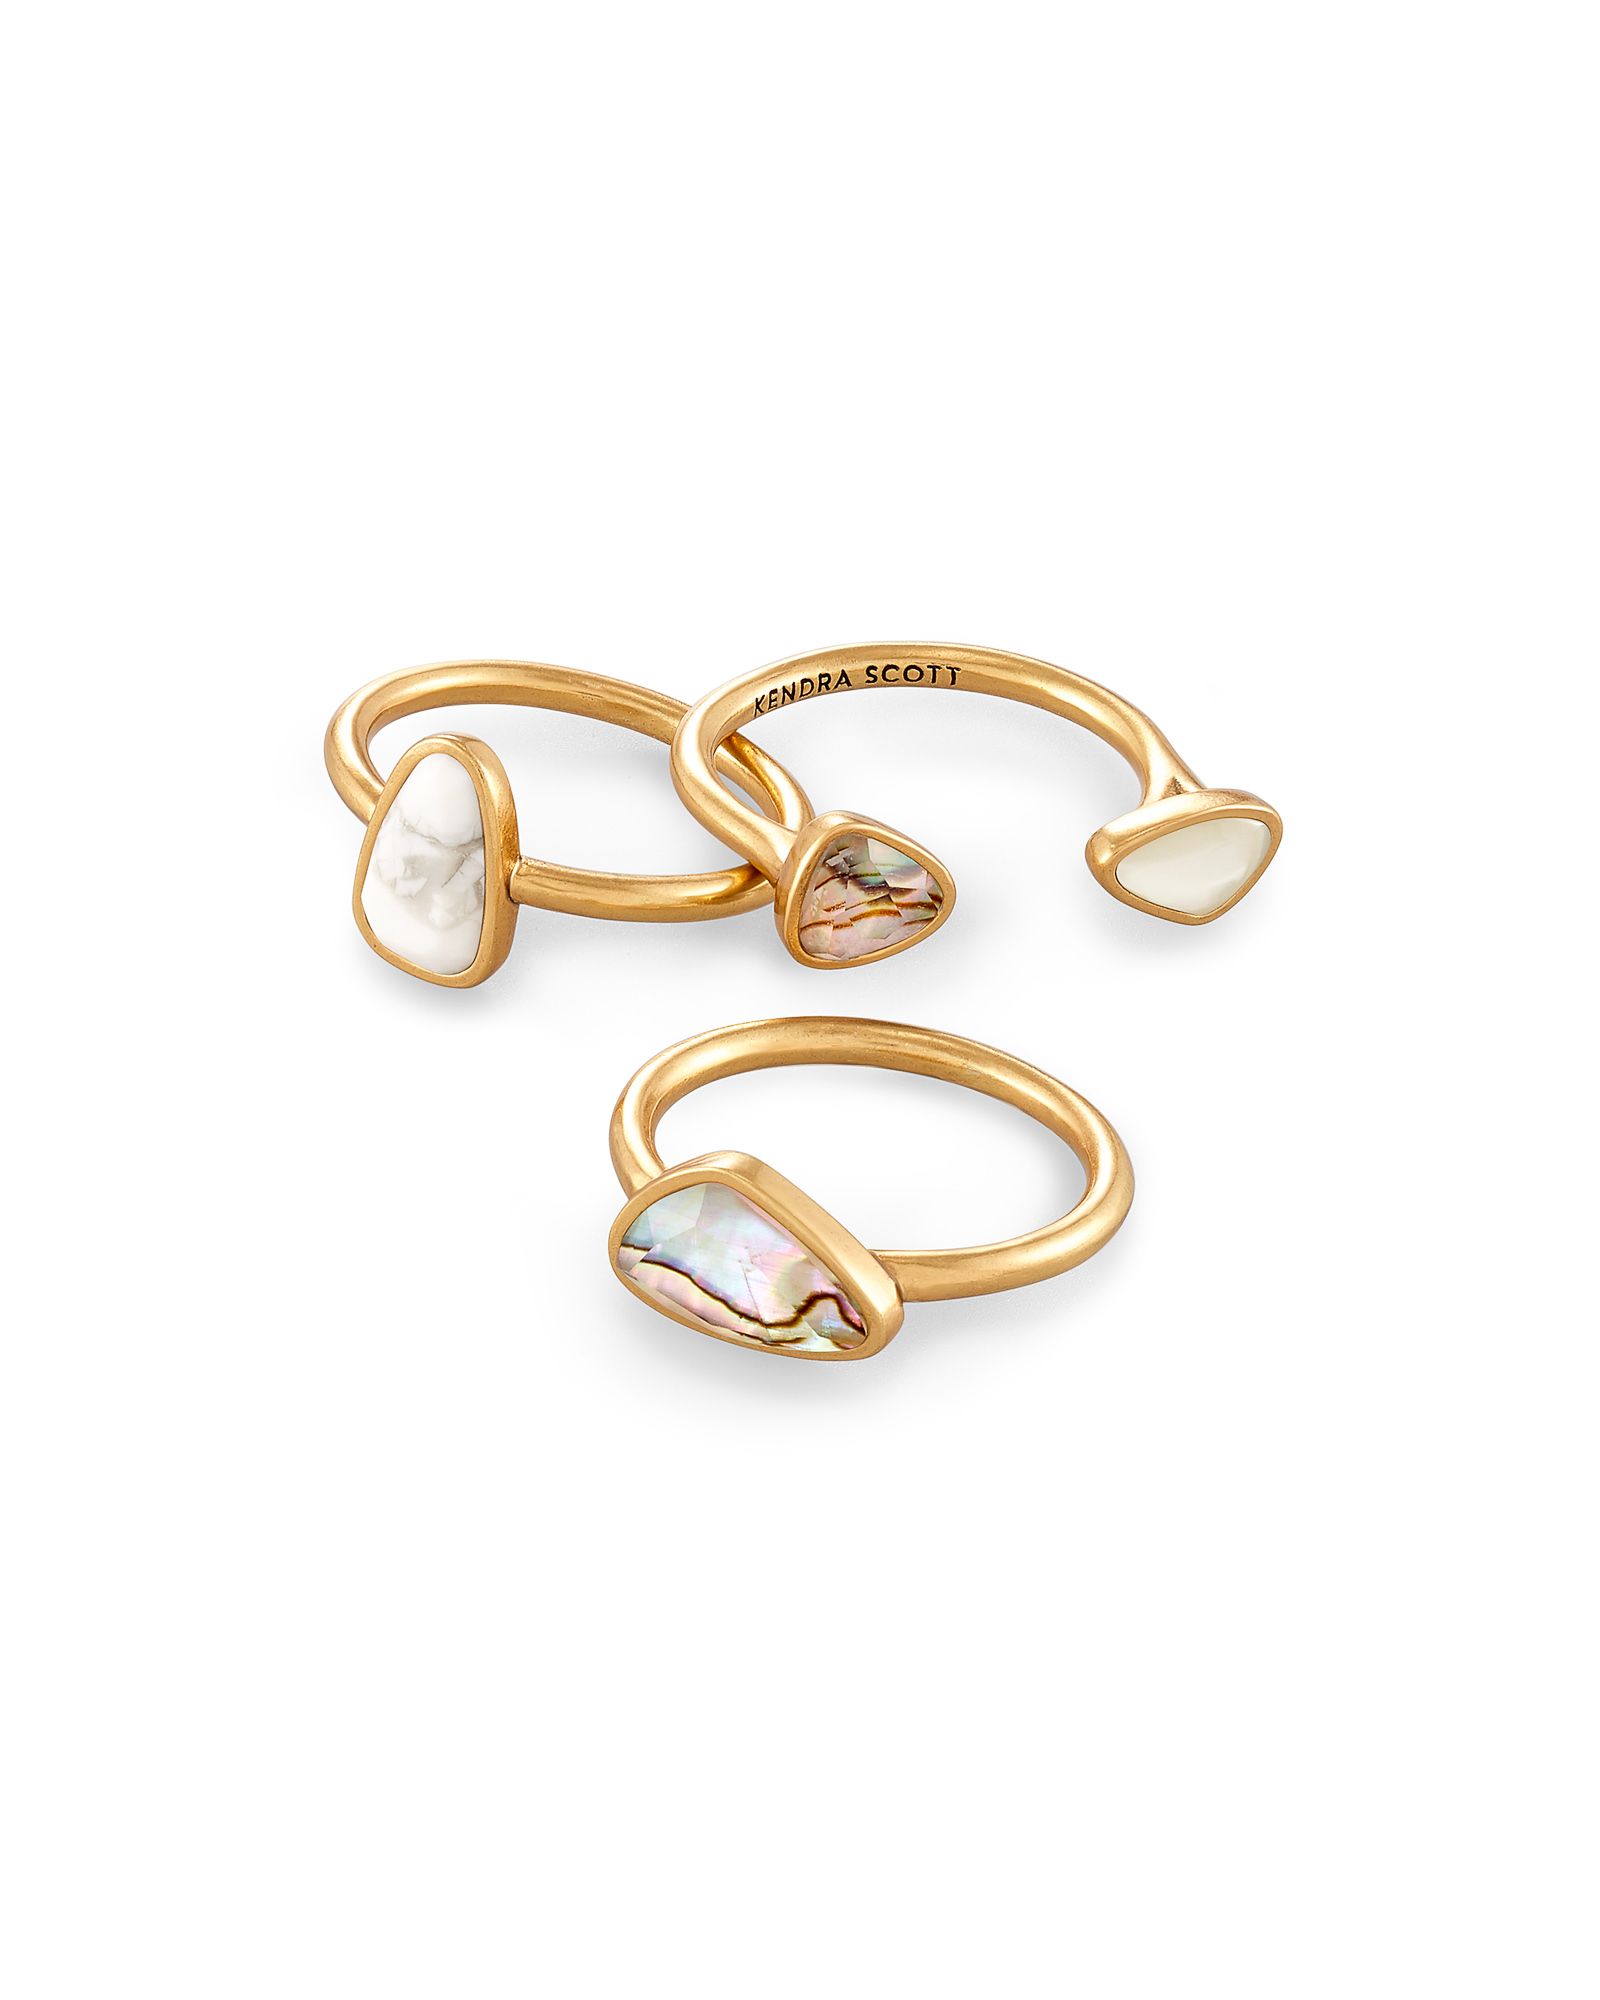 Ivy Vintage Gold Ring Set of 3 in White Mix | Kendra Scott